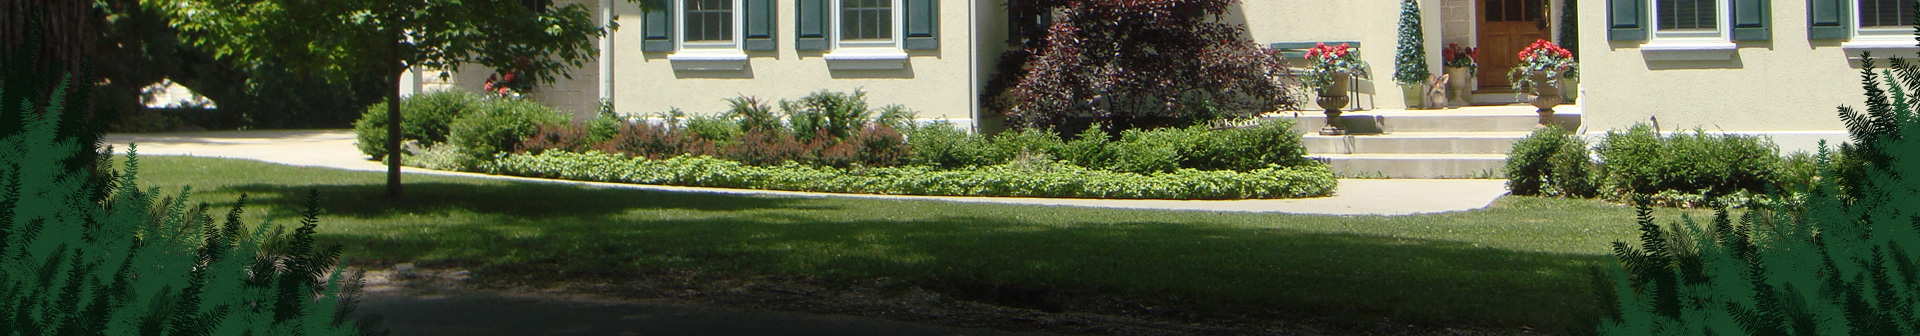 Yard Services for Wisconsin homeowners